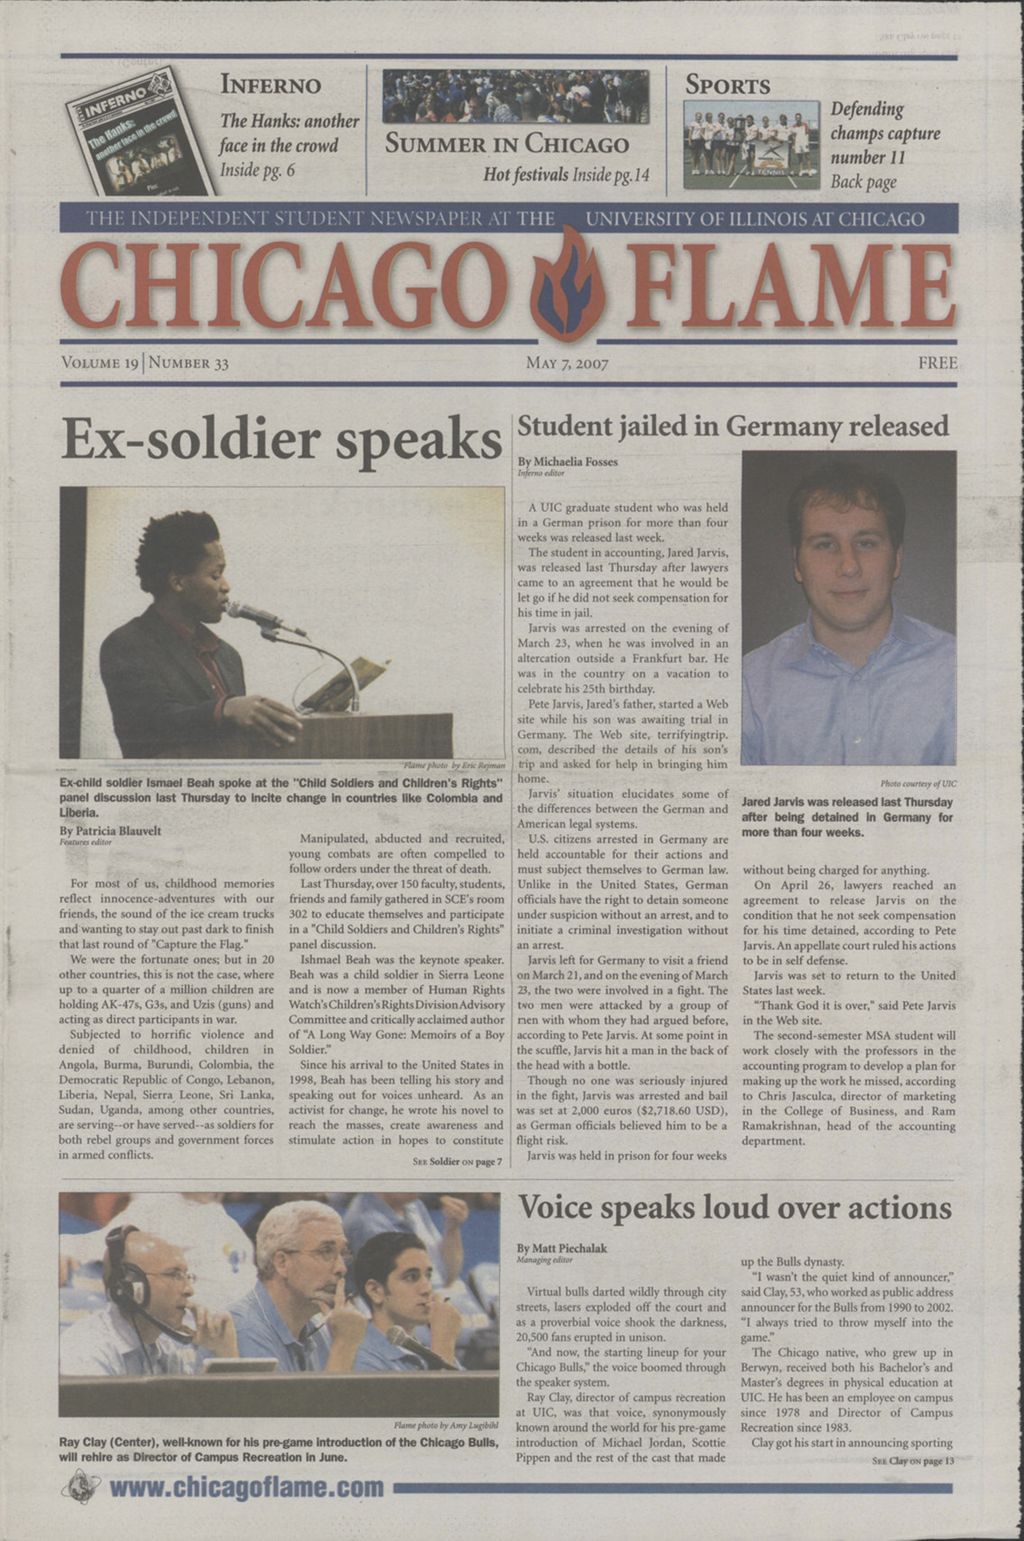 Miniature of Chicago Flame (May 7, 2007)